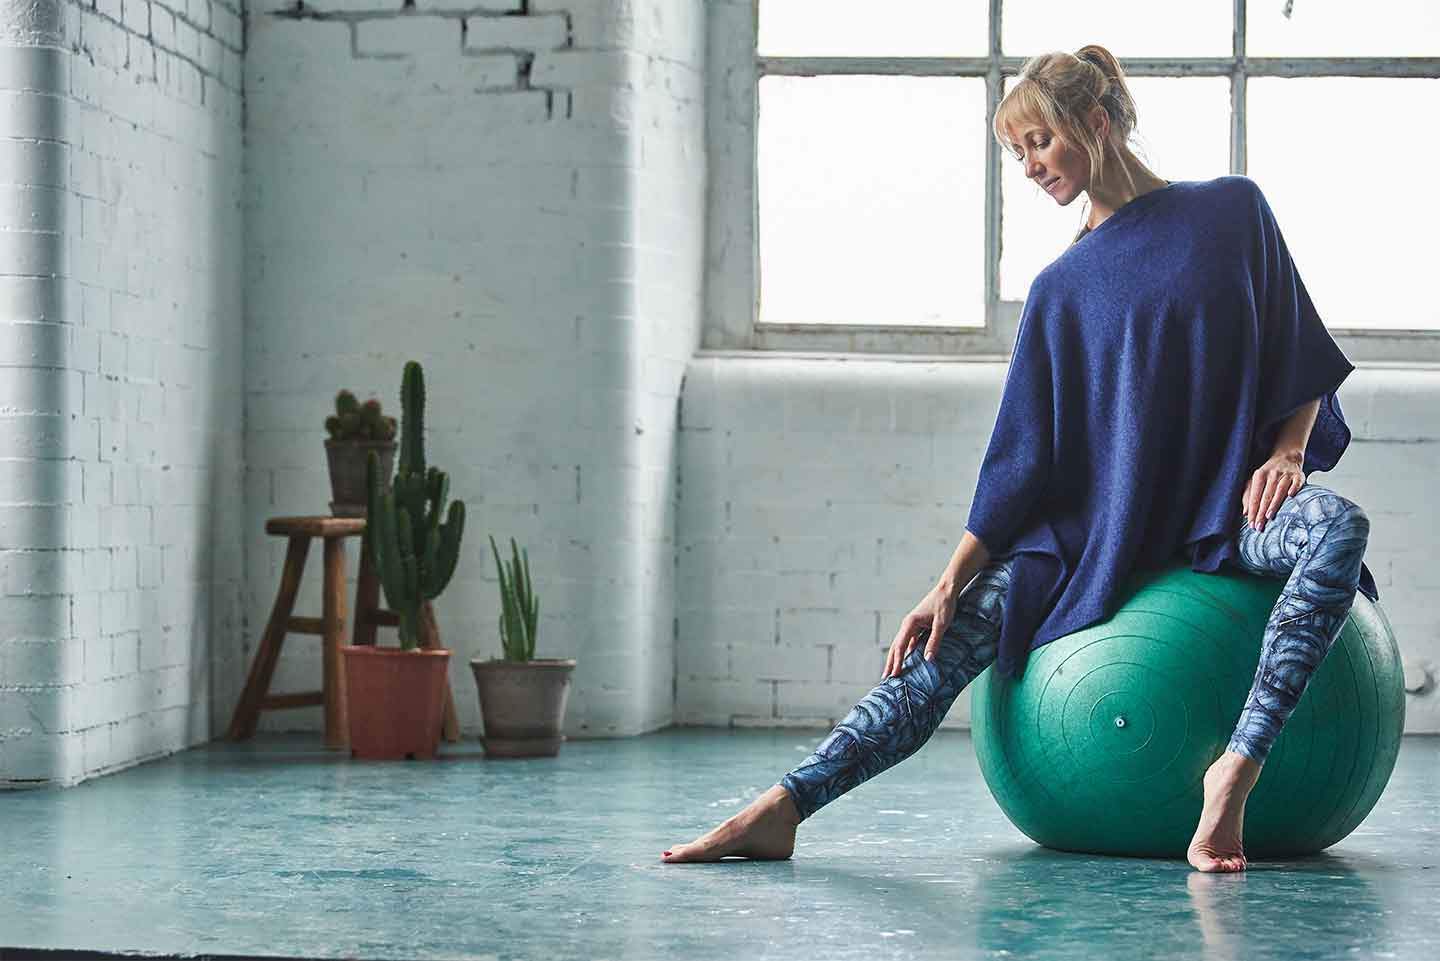 Women-doing-yoga-in-front-of-a-window-sat-on-a-yoga-ball-in-sportswear-and-blue-cashmere-poncho